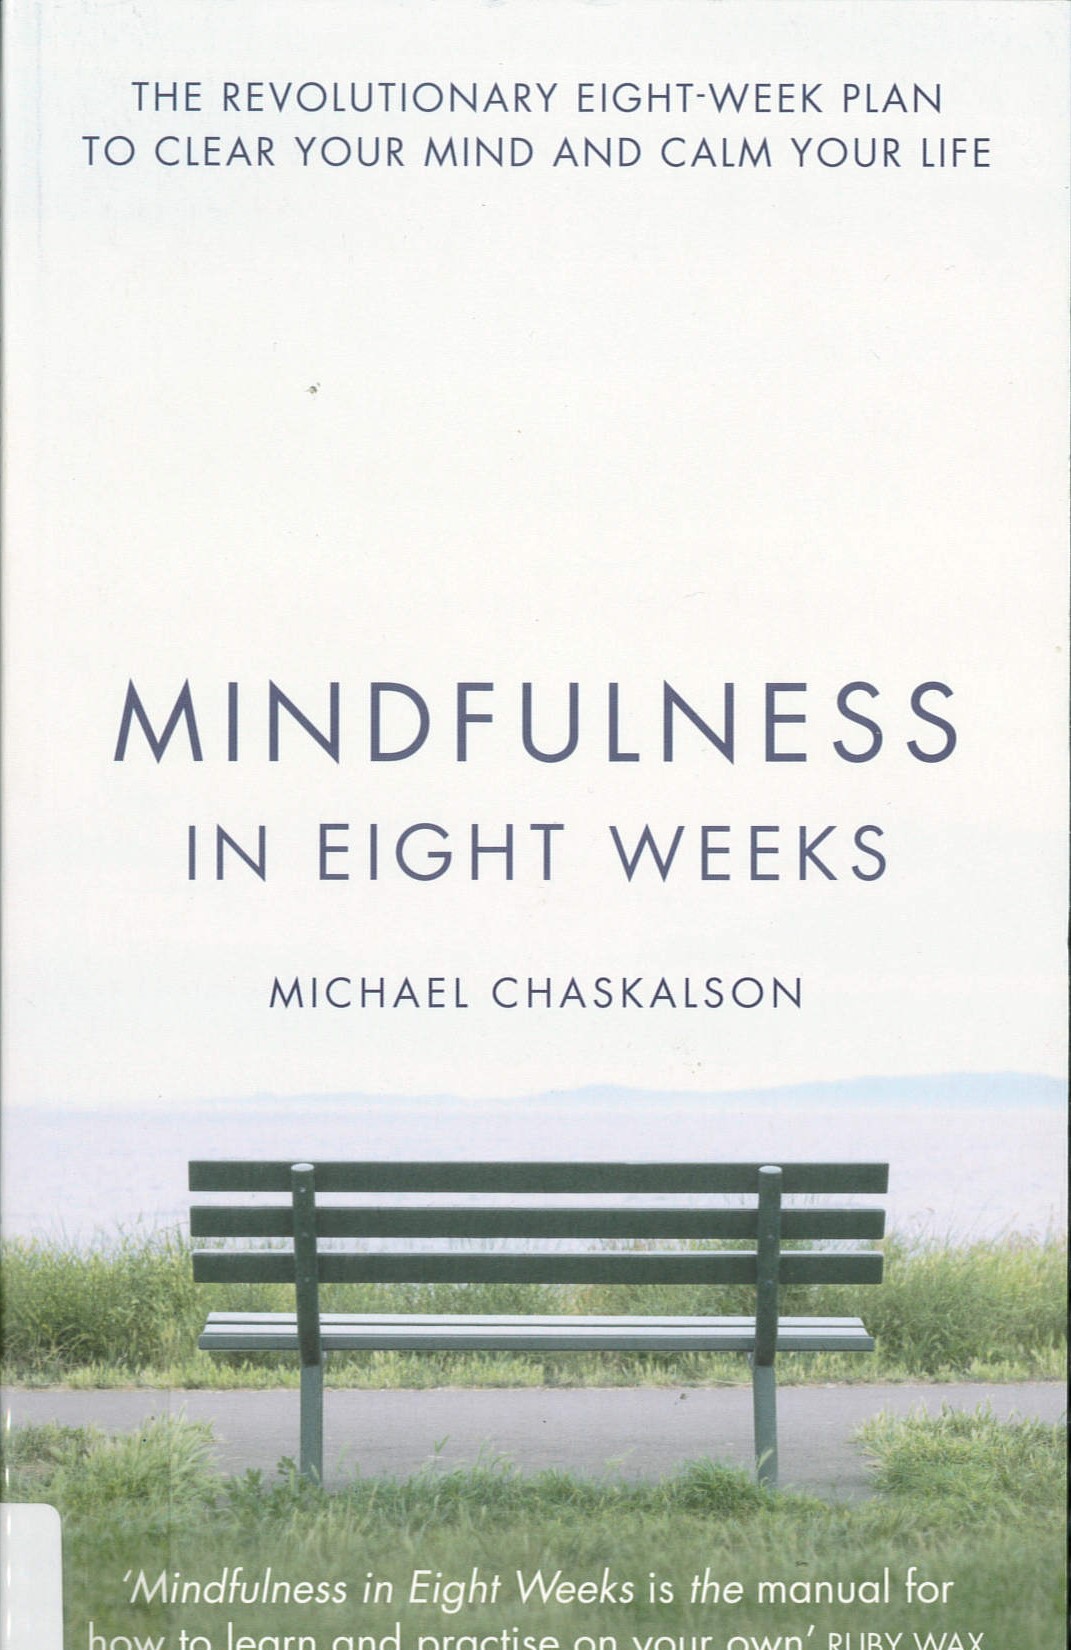 Mindfulness in eight weeks the revolutionary eight-week plan to clear your mind and calm your life